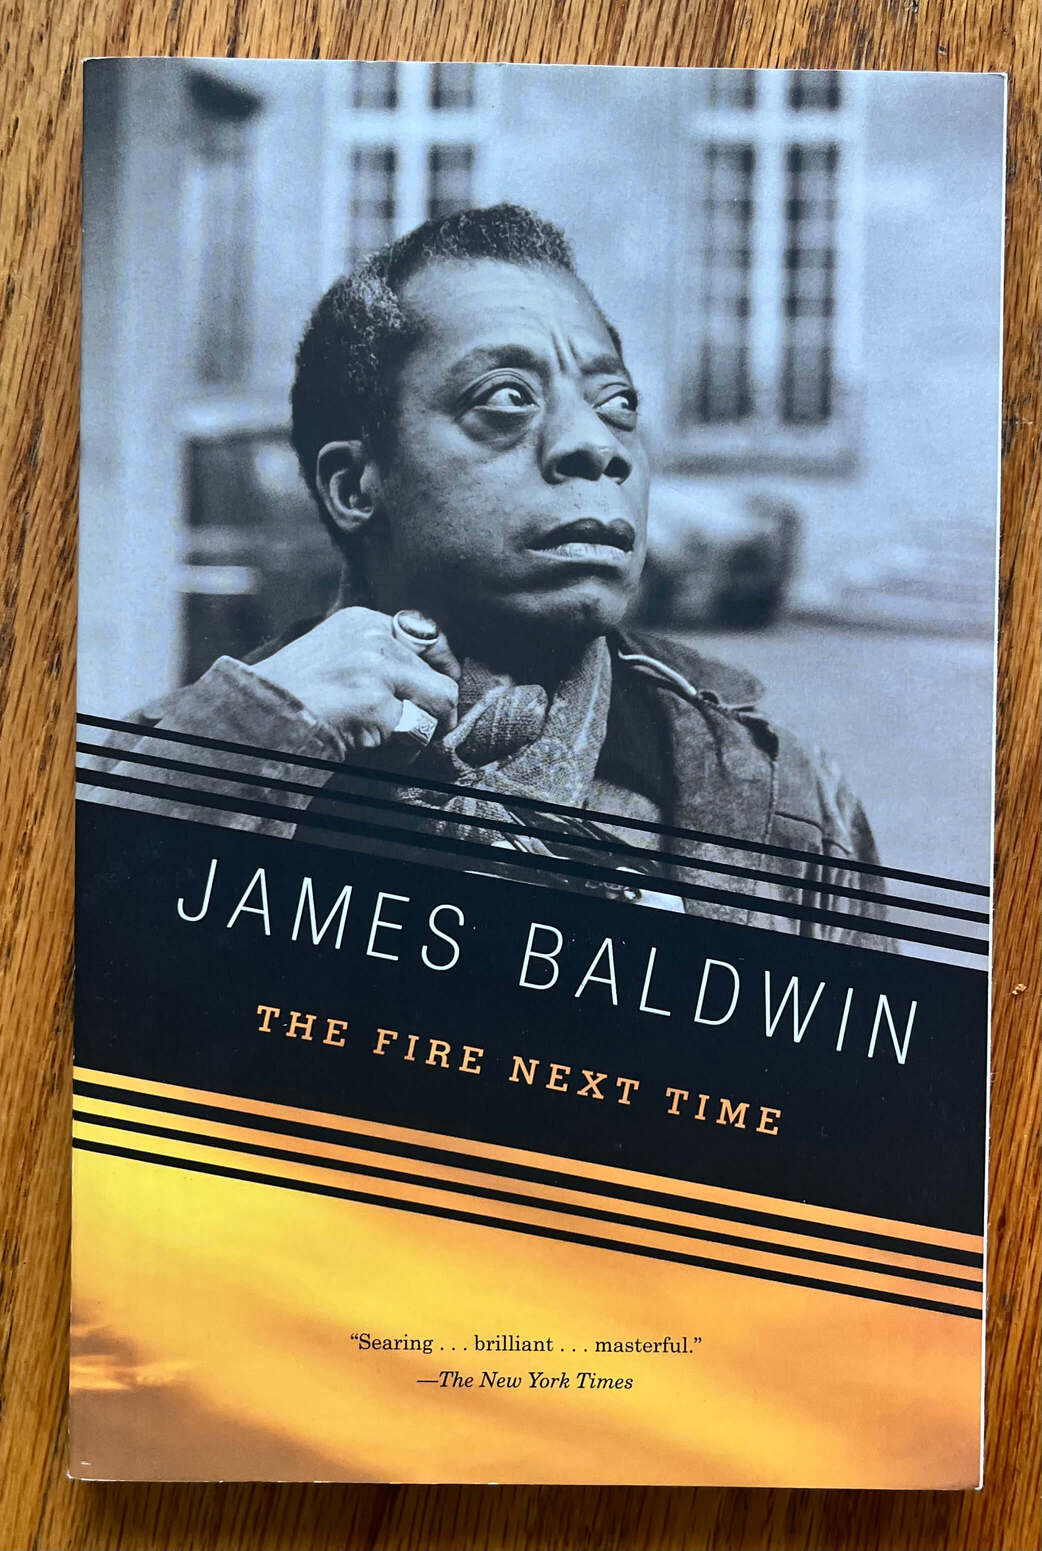 “The Fire Next Time” by James Baldwin.